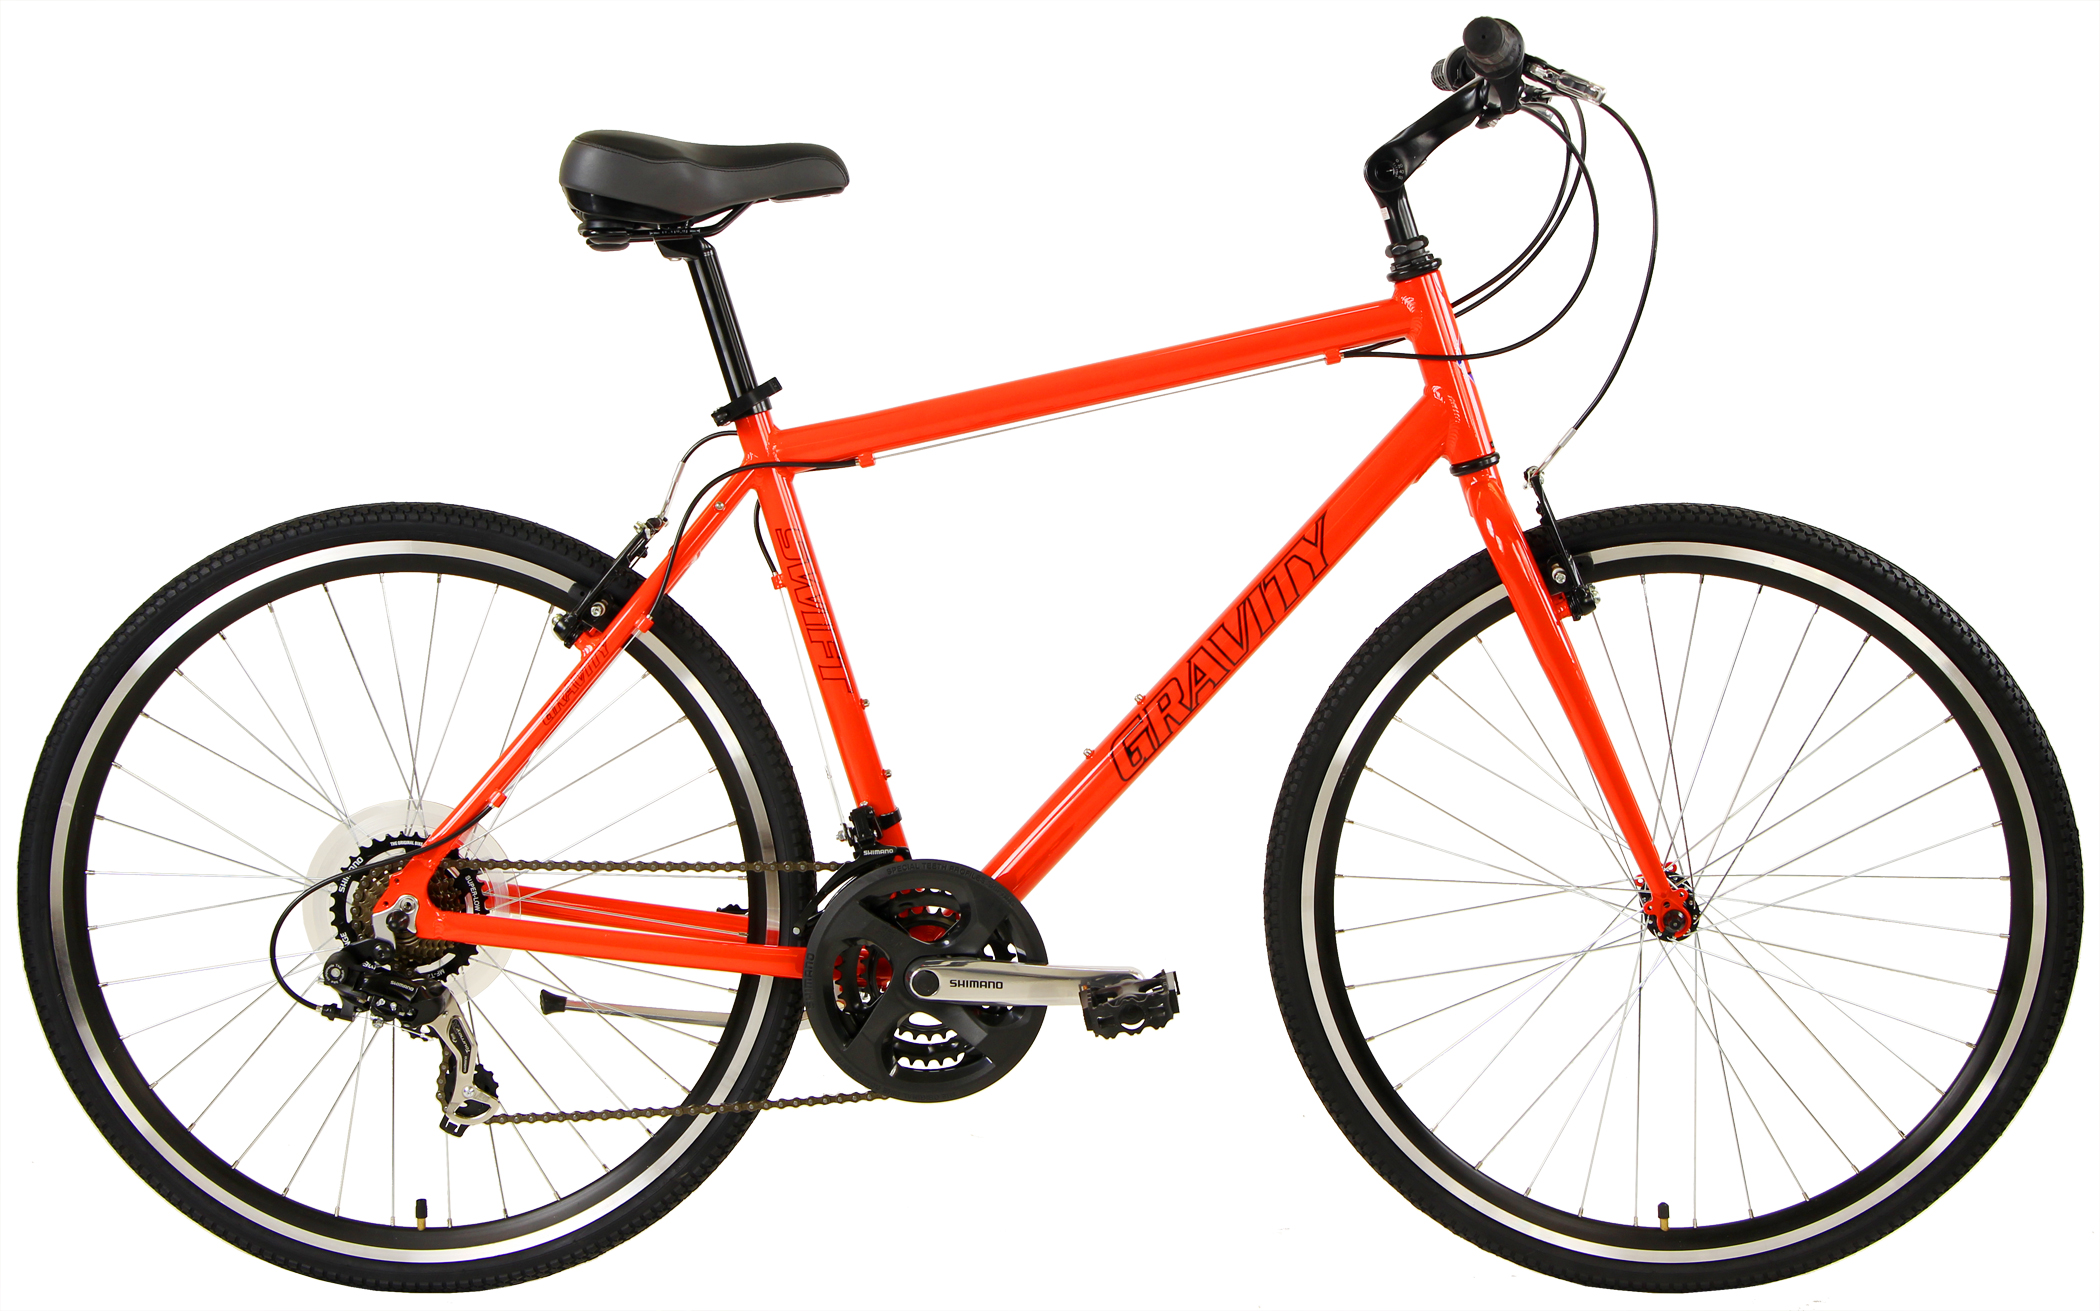 Save up to 60% off new Flat Bar Hybrid Bikes